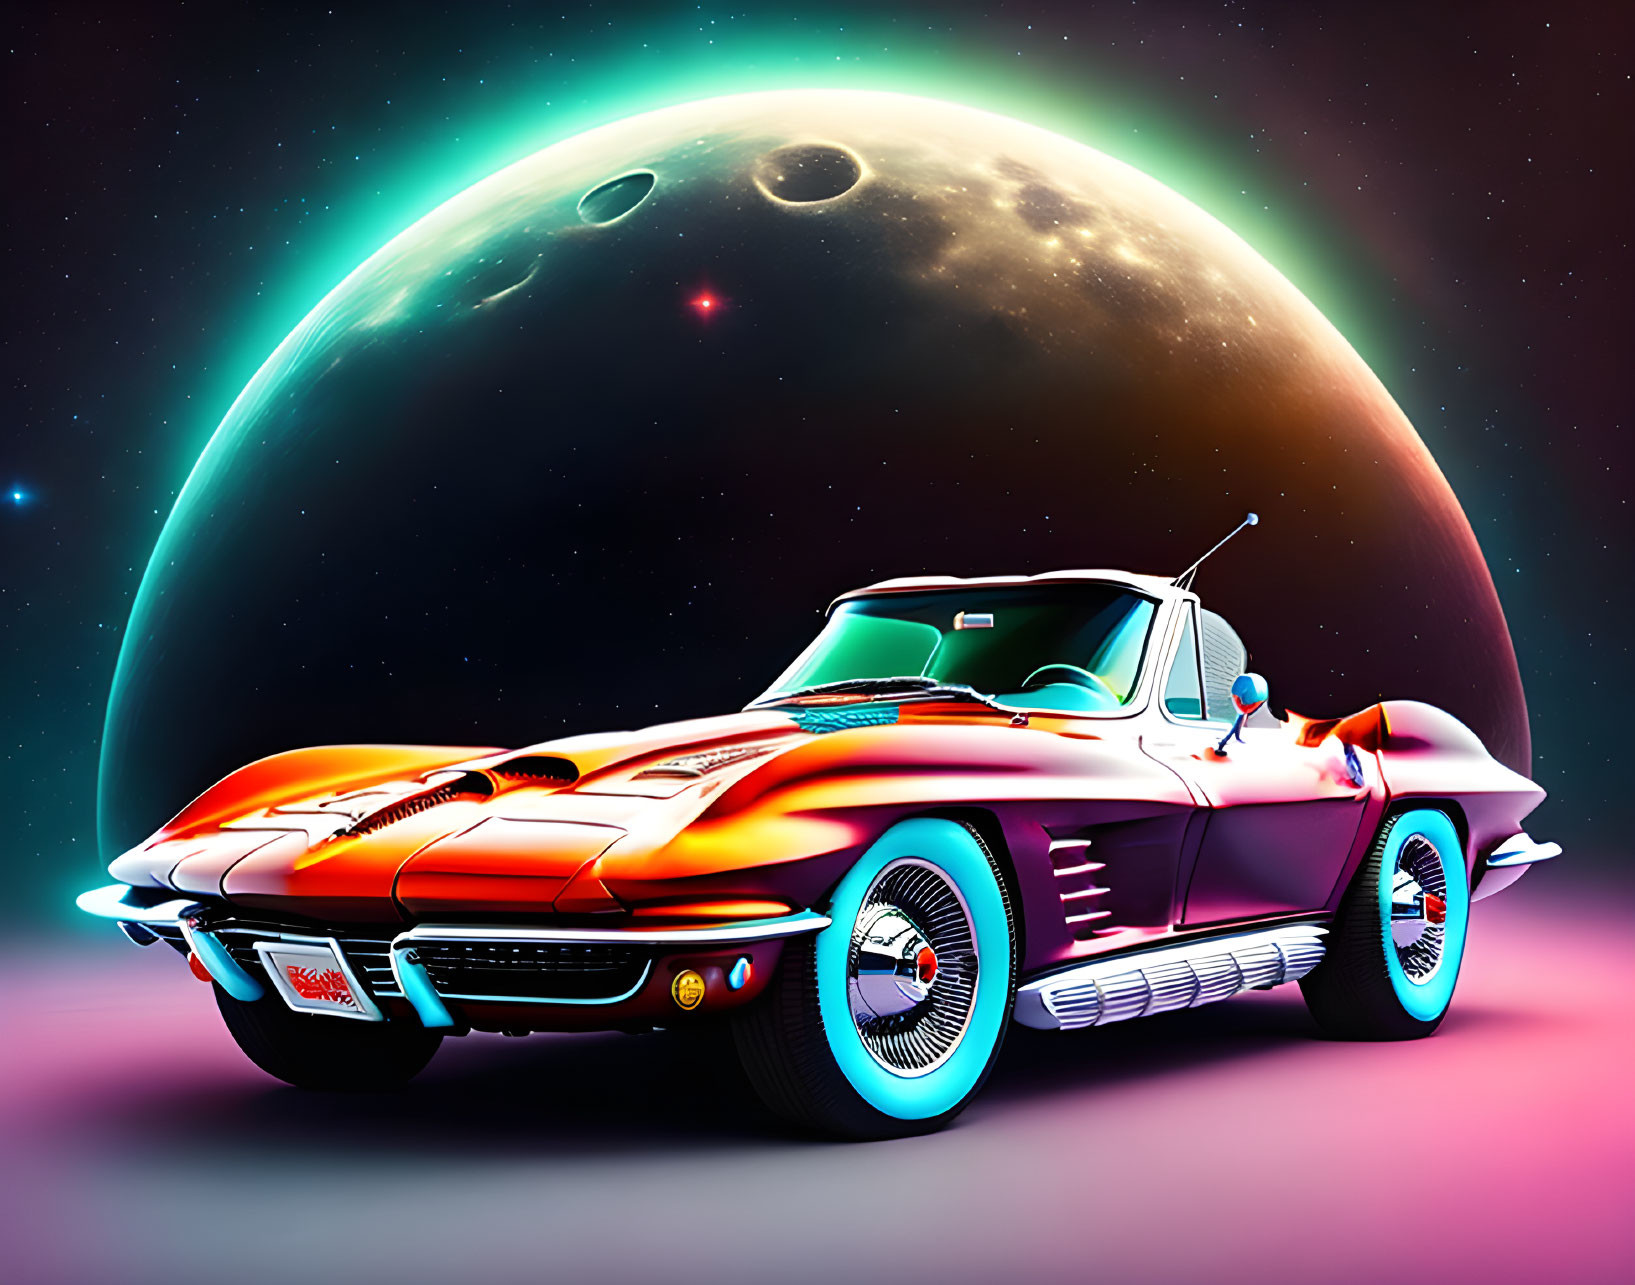 Vintage Corvette Convertible with Cosmic Background and Planet